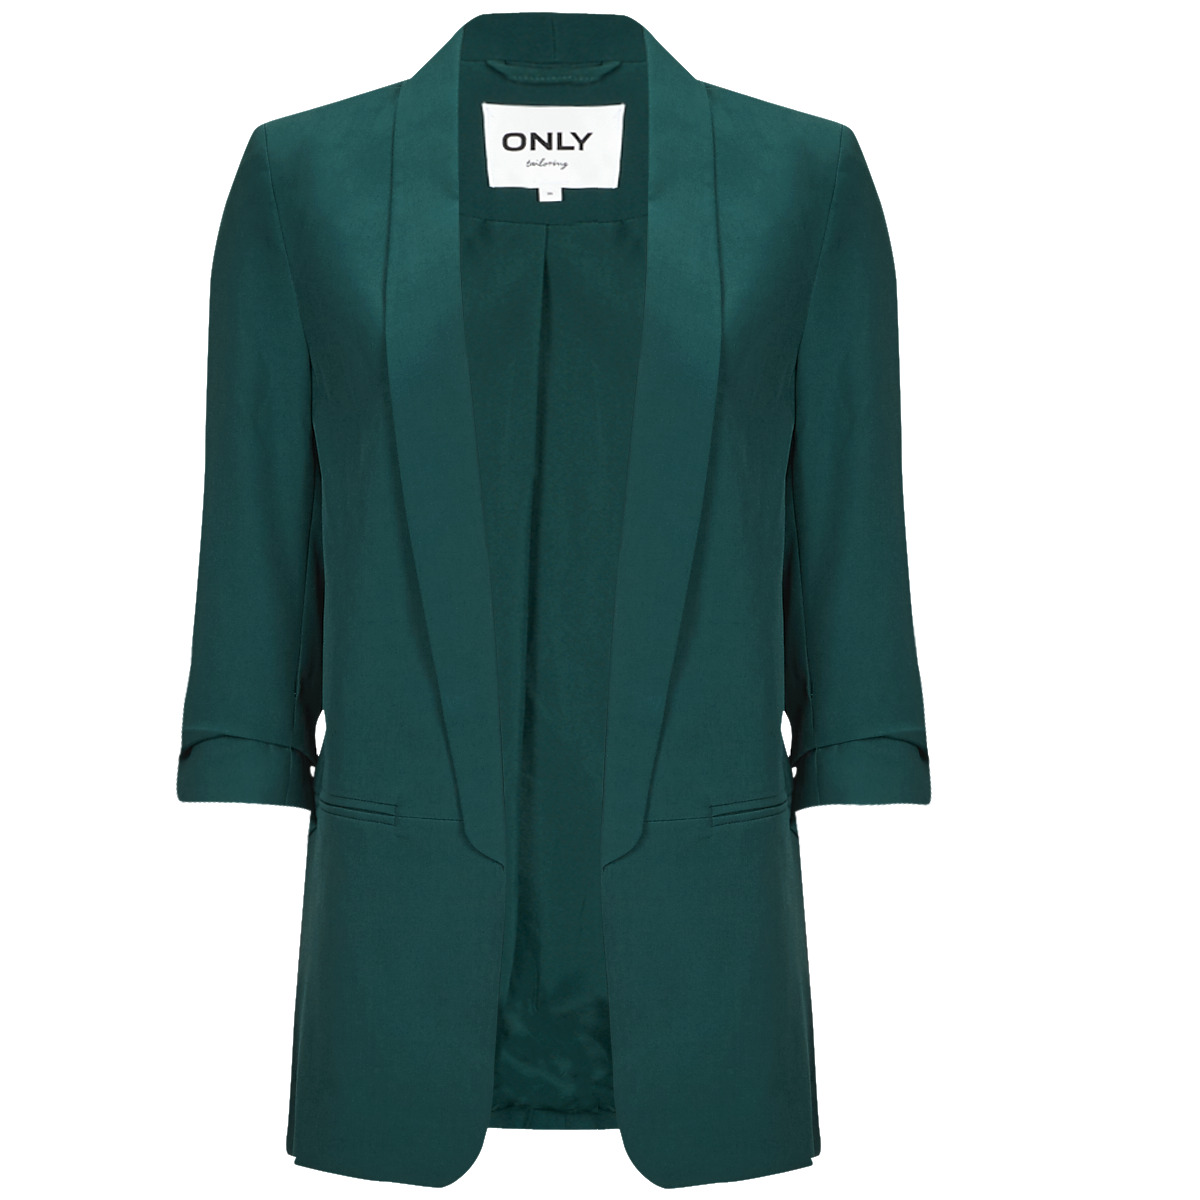 Green NET LIFE Clothing / delivery Only - 3/4 ! TLR Spartoo - Women Free | Blazers ONLELLY Jackets BLAZER